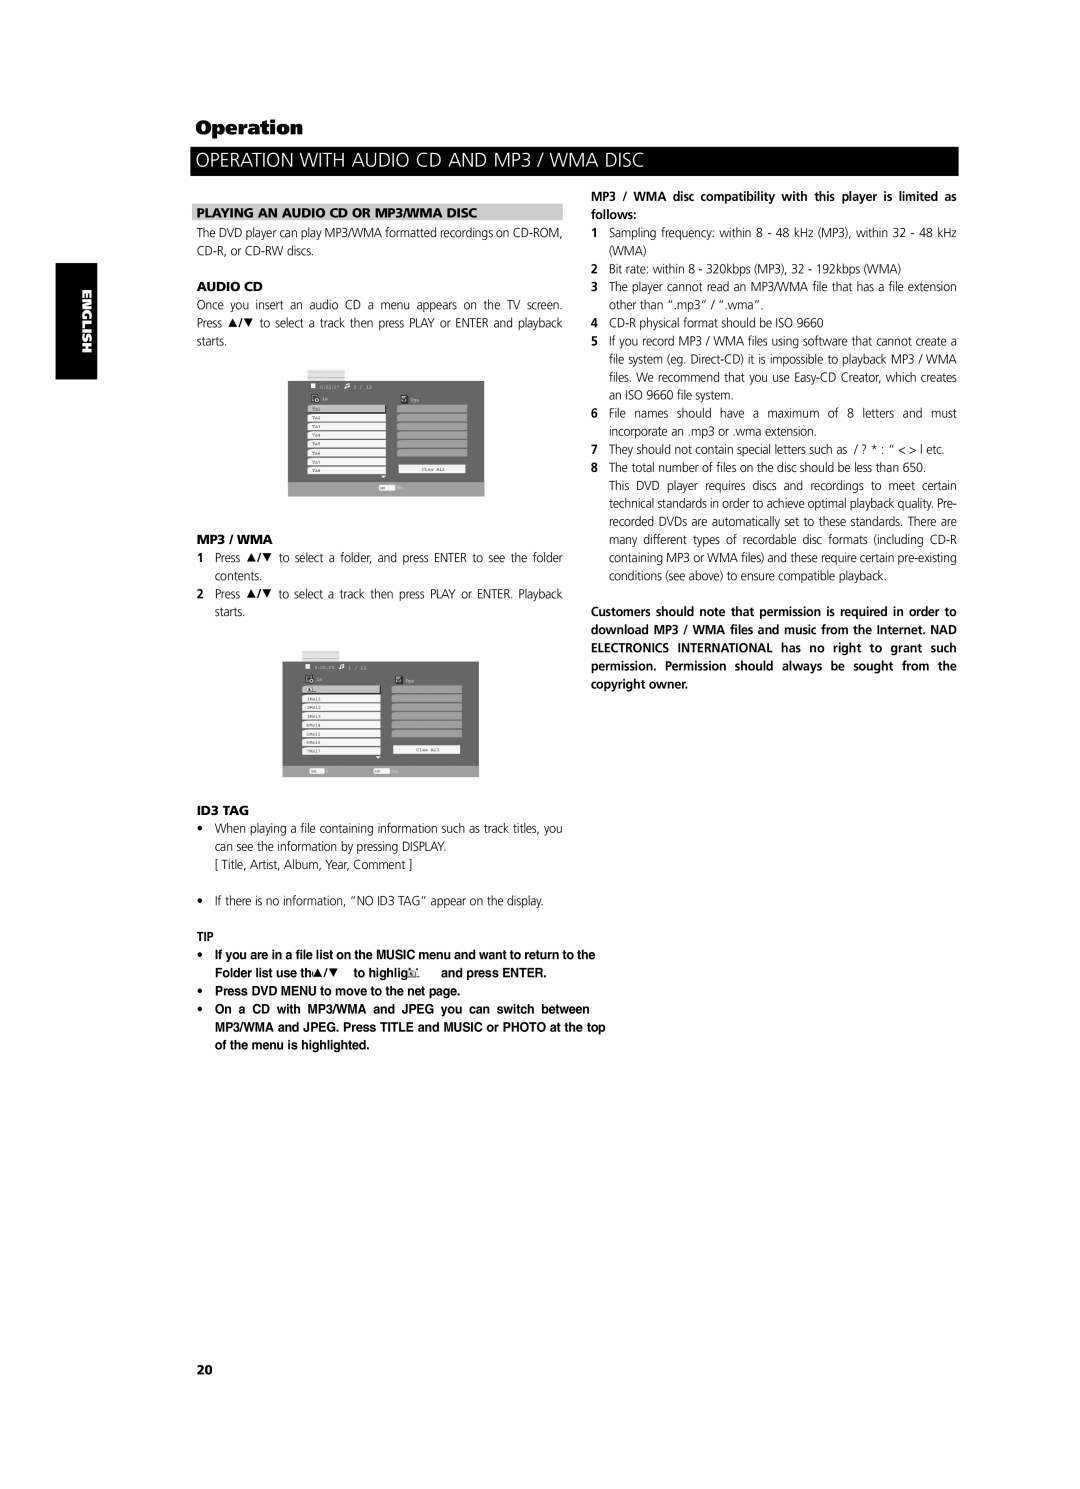 NAD T514 owner manual Operation with Audio CD and MP3 / WMA Disc, Playing AN Audio CD or MP3/WMA Disc, ID3 TAG 